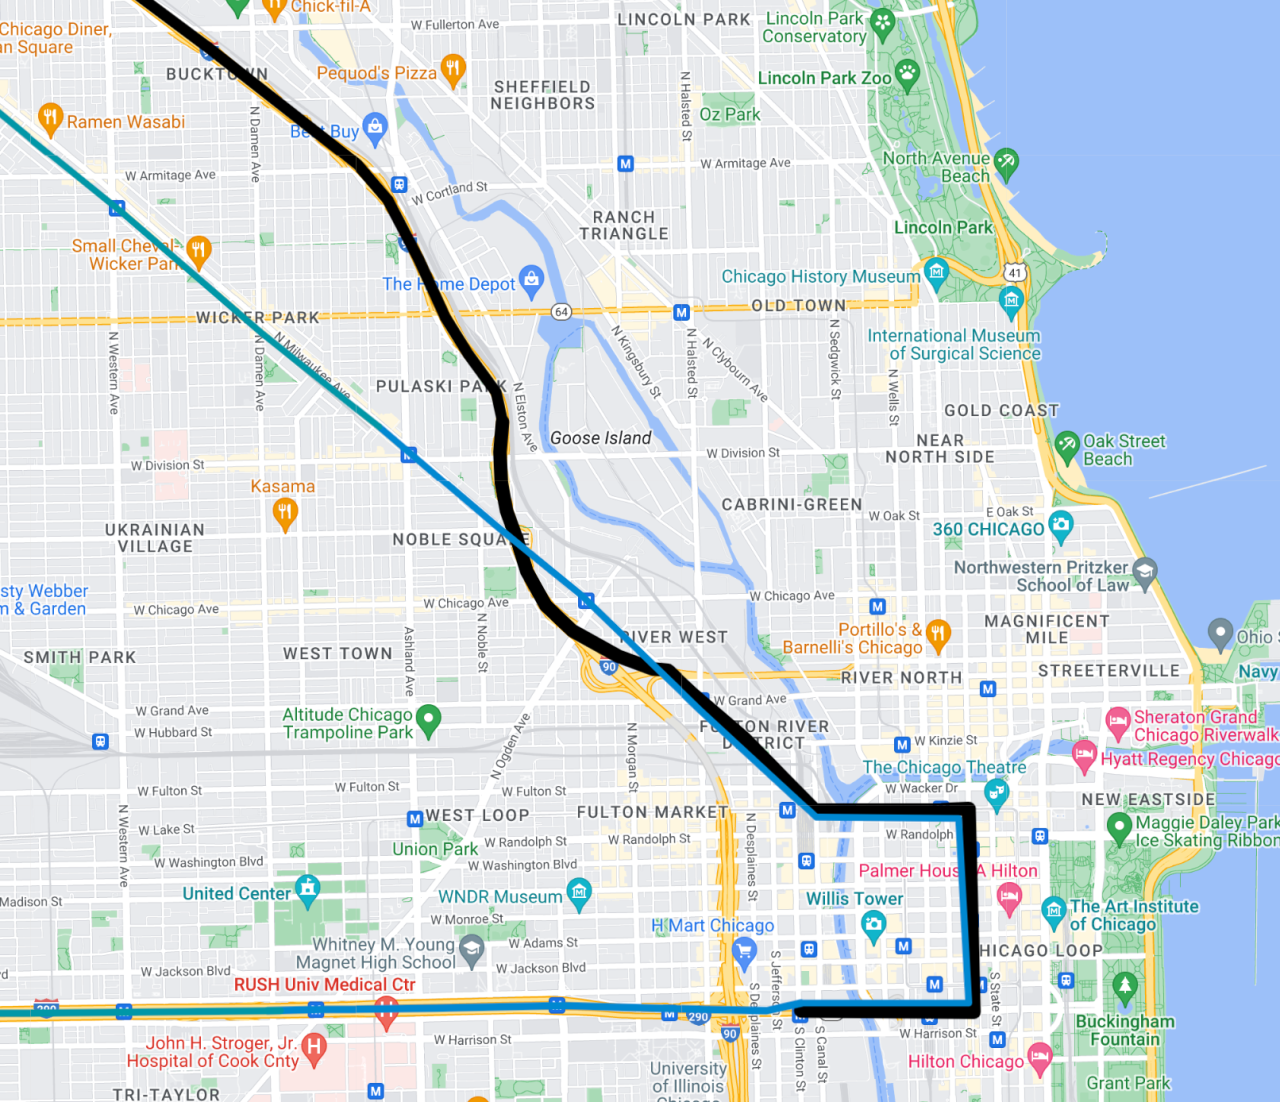 The Blue Line route (blue) and a possible route for airport express service (black.) Image: Google Maps